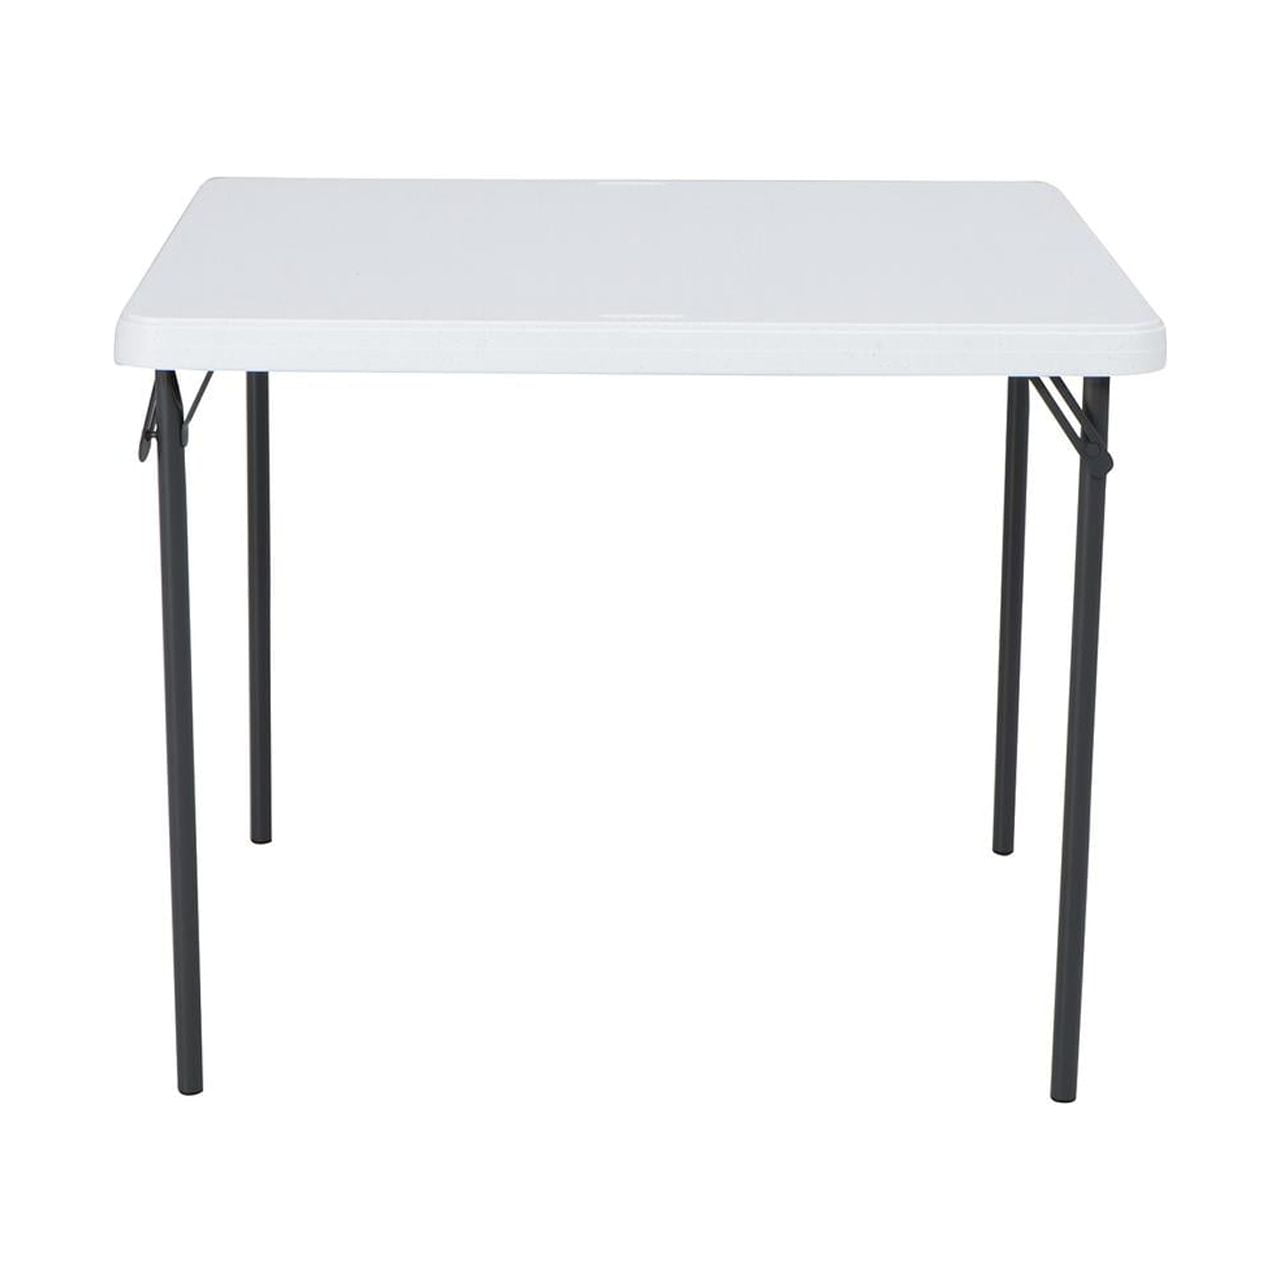 Lifetime 37 inch Square Folding Table, Indoor/Outdoor Commercial Grade,  White Granite (80783)